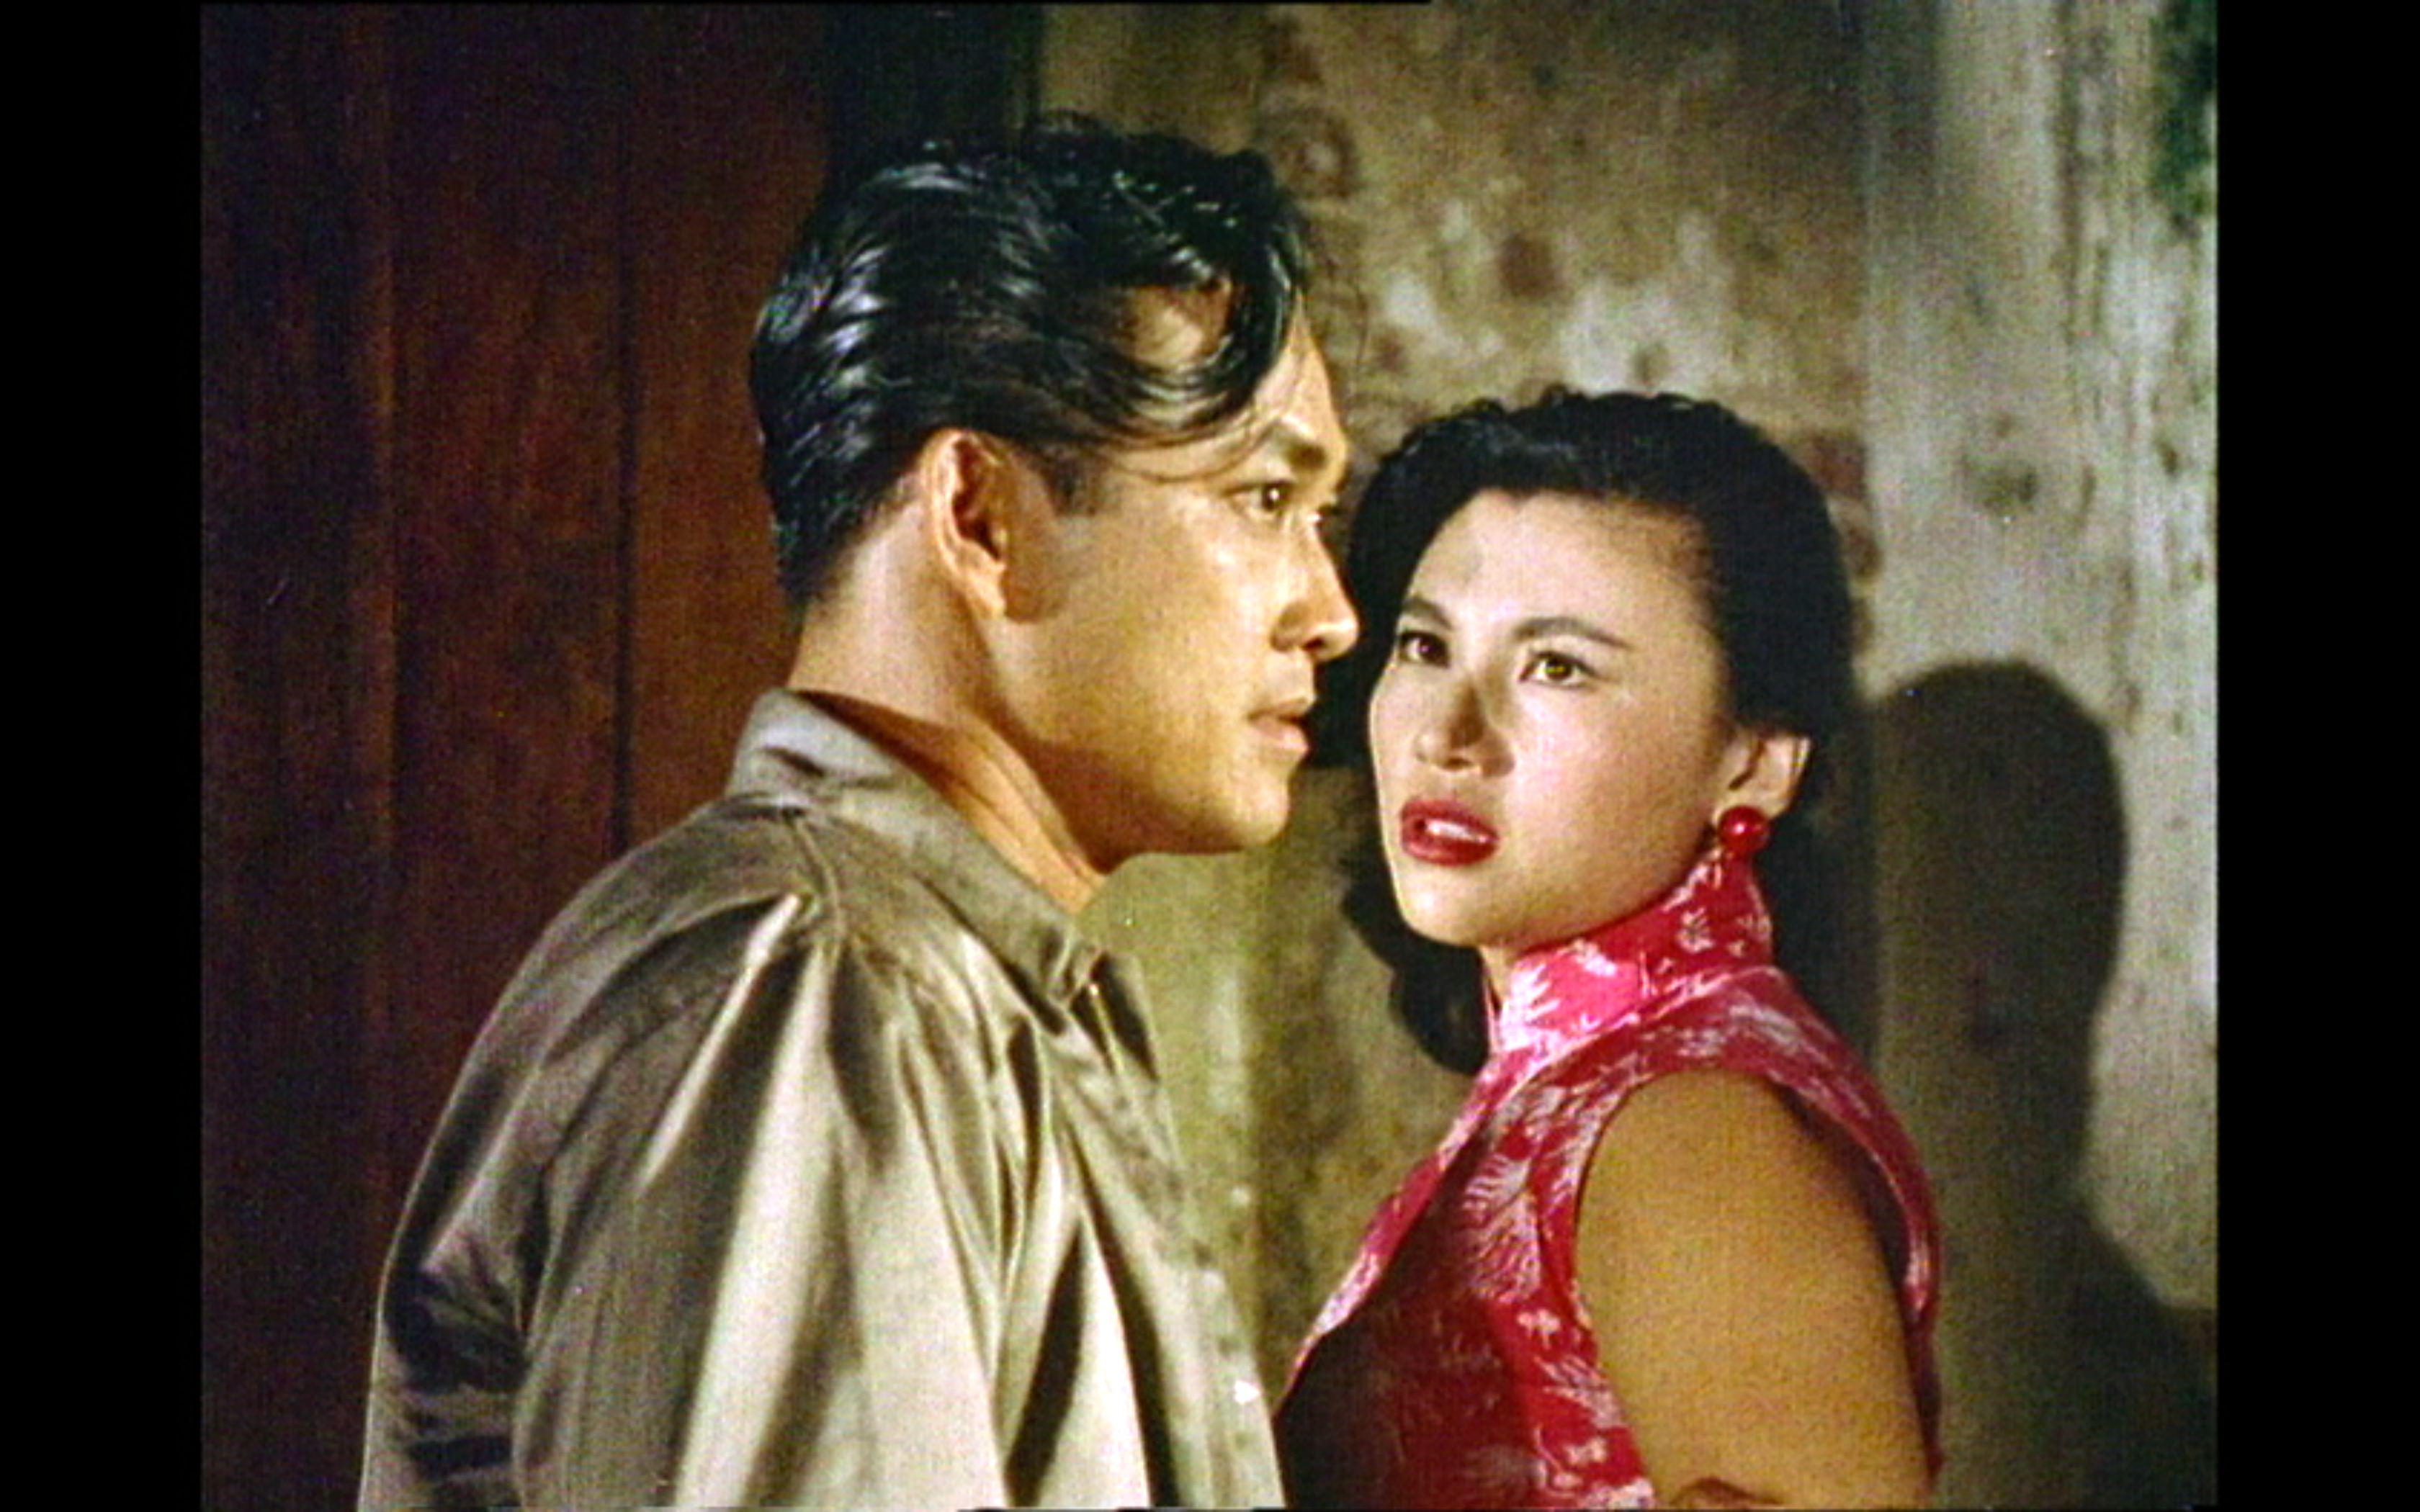 The Hong Kong Film Archive (HKFA) of the Leisure and Cultural Services Department will partner with the Royal Thai Consulate-General in Hong Kong to present a new "Movies to GO" series under the theme of "Border Crossings in Hong Kong Cinema - Thailand". The movies "Flame In Ashes" (aka Underground Sparks) (1958) and "The Killer" (1989) will be screened at the HKFA Cinema on November 6 to explore the cross-border connections between Hong Kong and Thailand in the film market. Photo shows a film still of "Flame In Ashes".